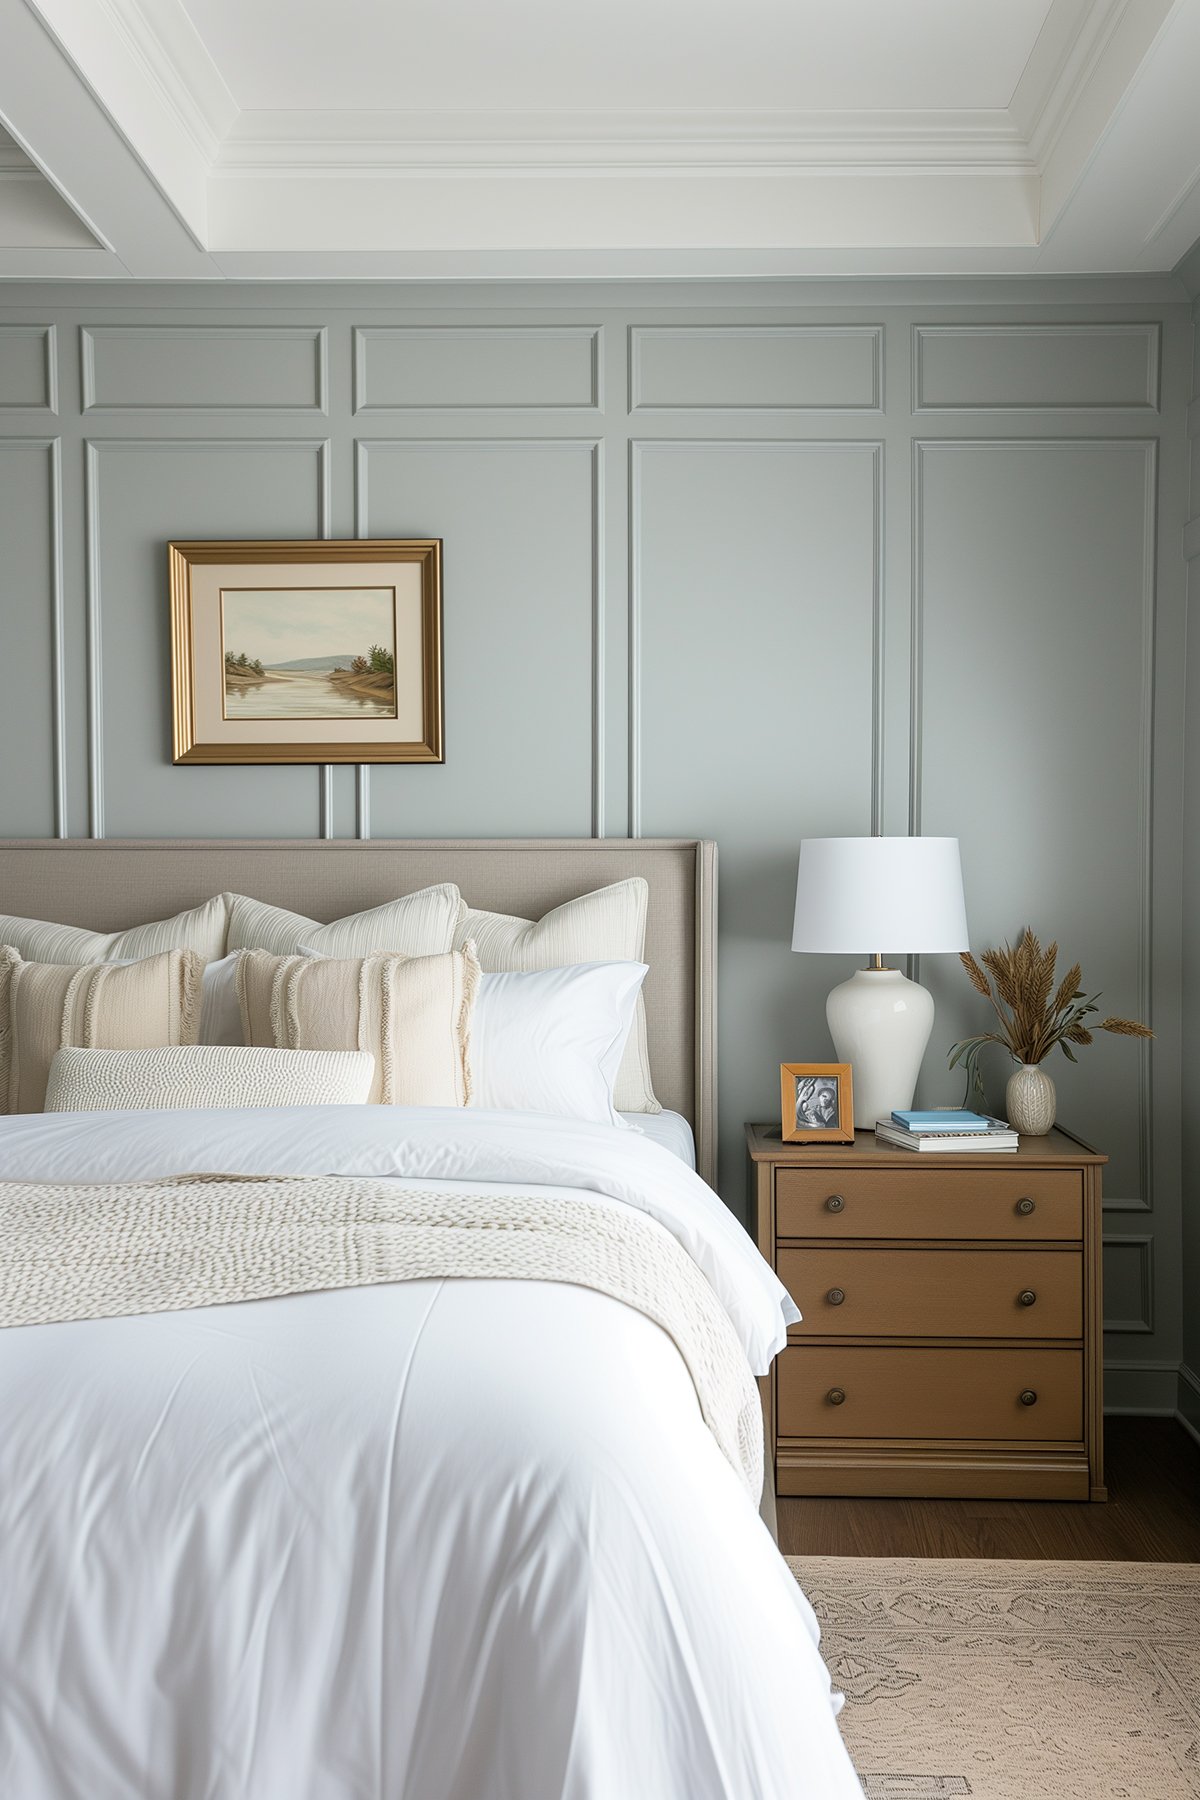 Bedroom with picture frame molding painted Benjamin Moore Boothbay Gray. There's a wood nightstand and beige upholstered bed.